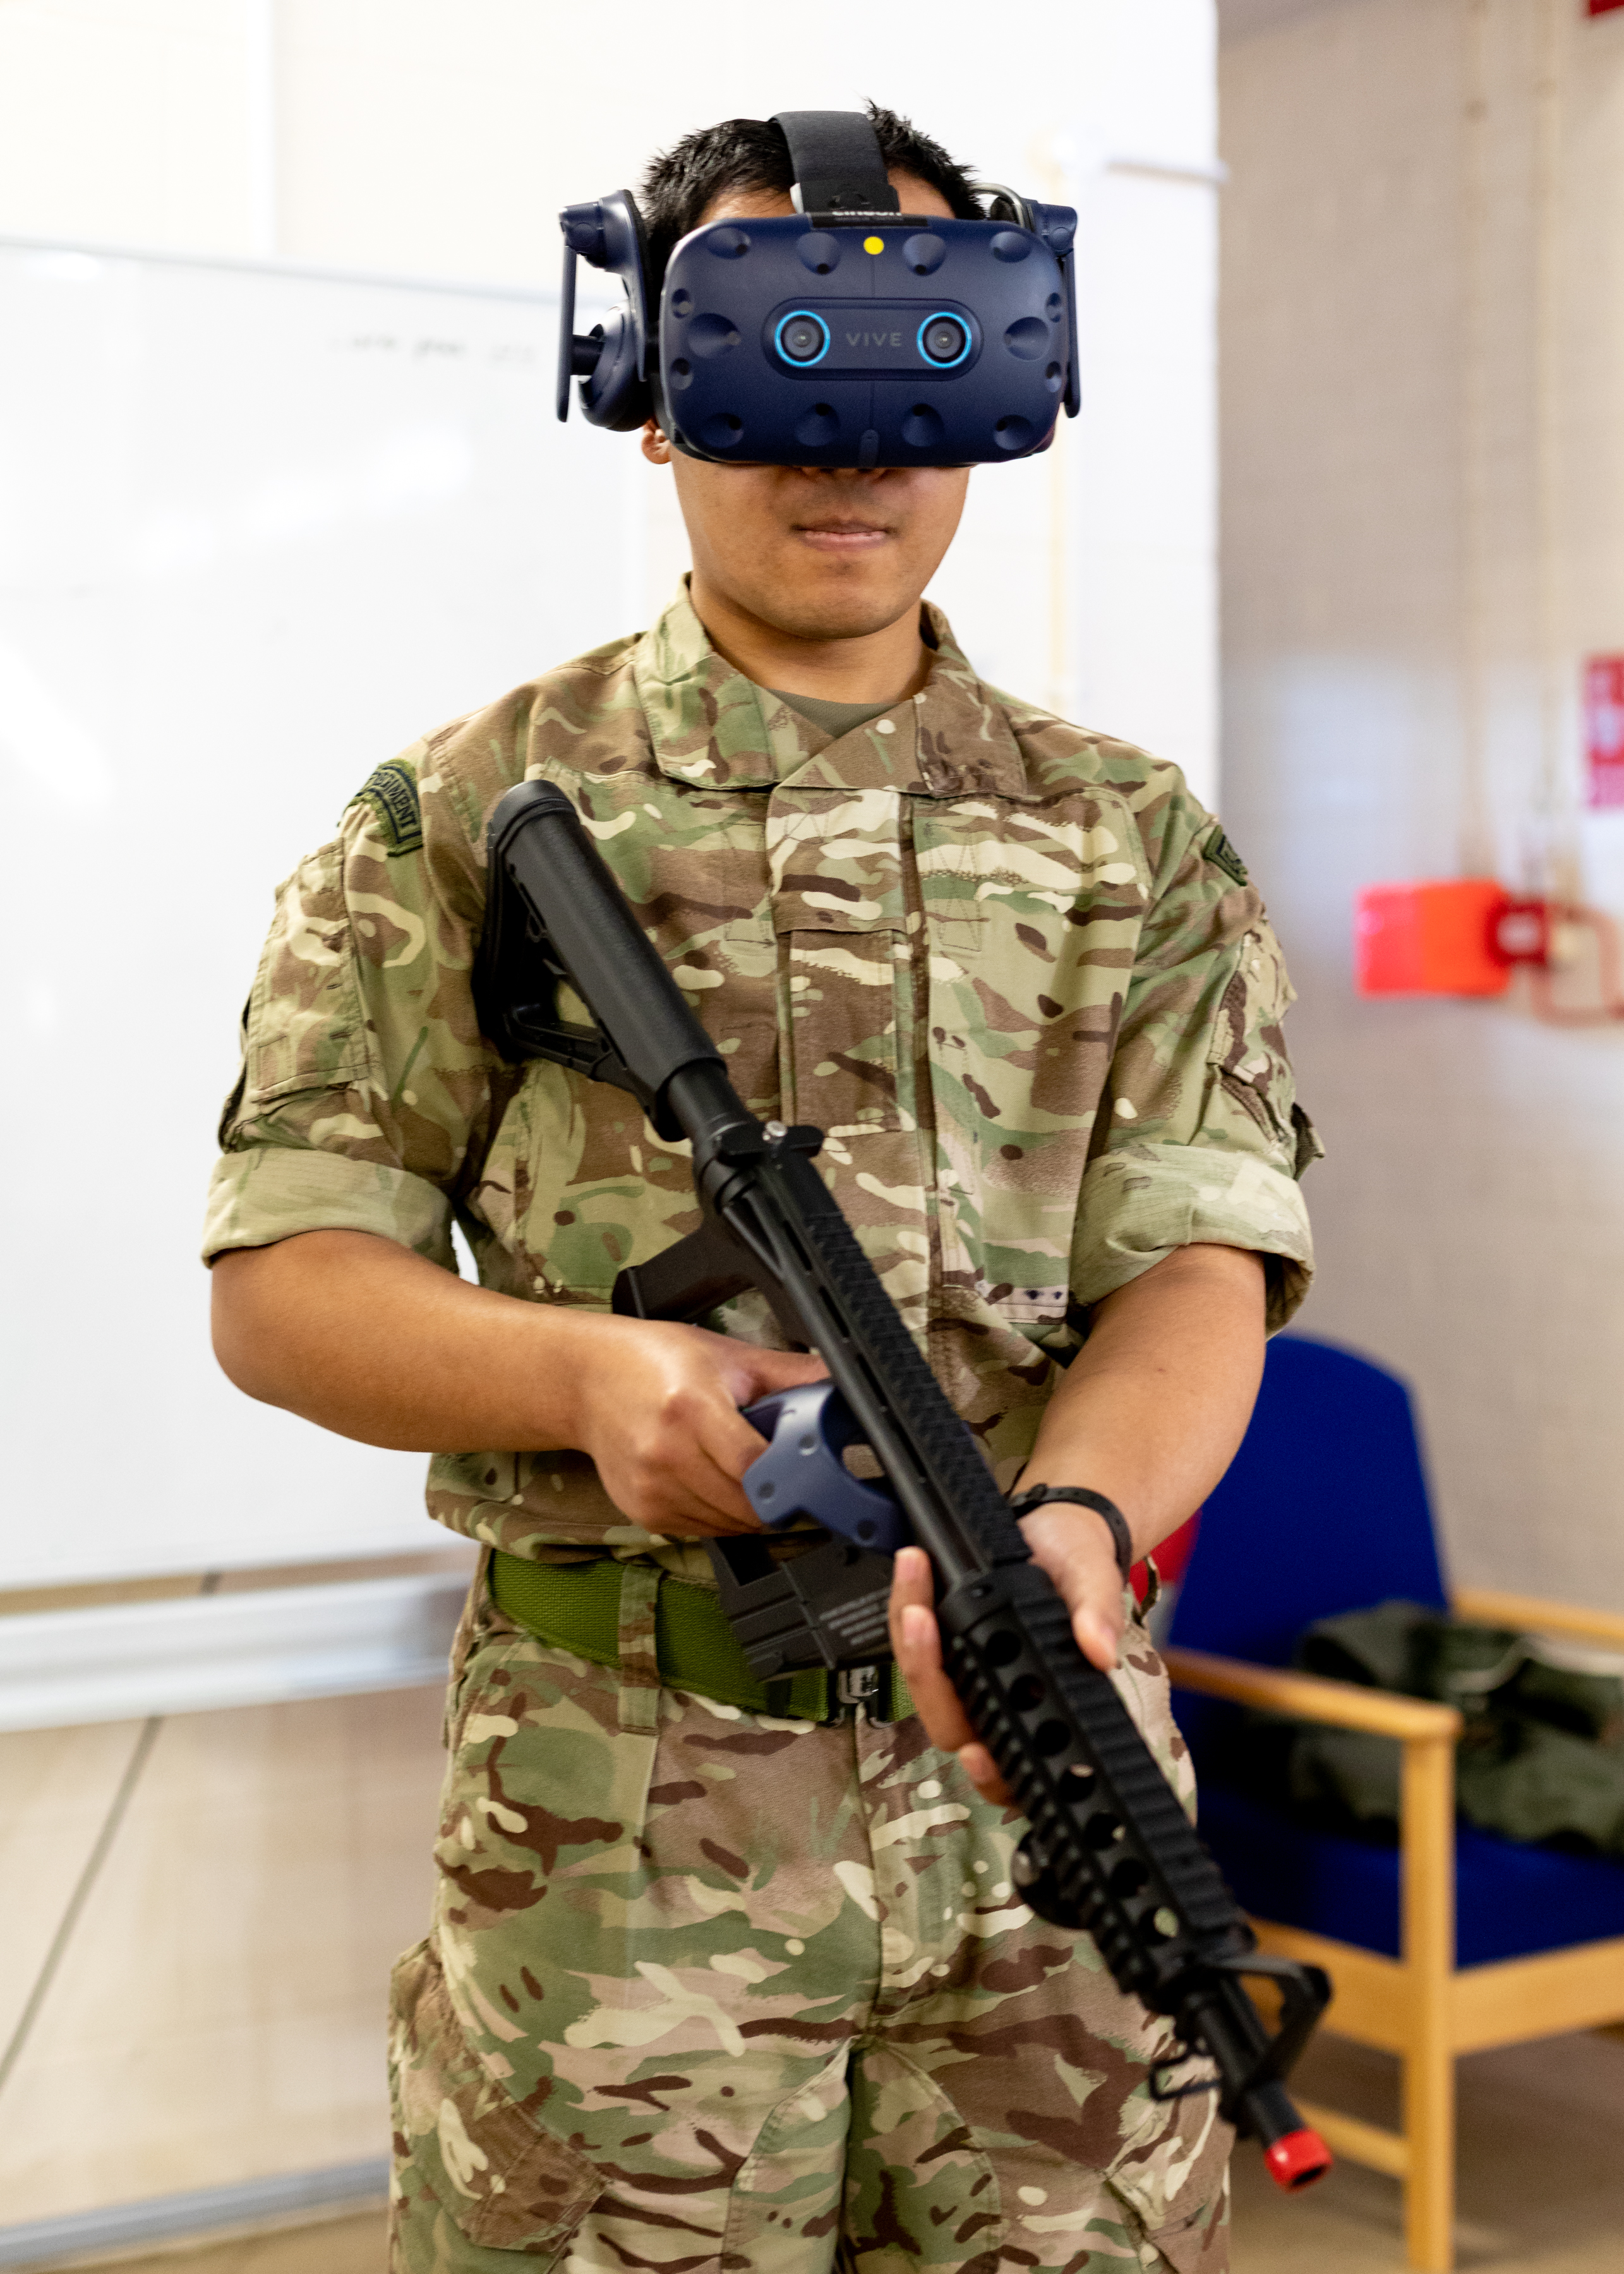 Image shows aviator holding rifle and wearing Virtual Reality headset.